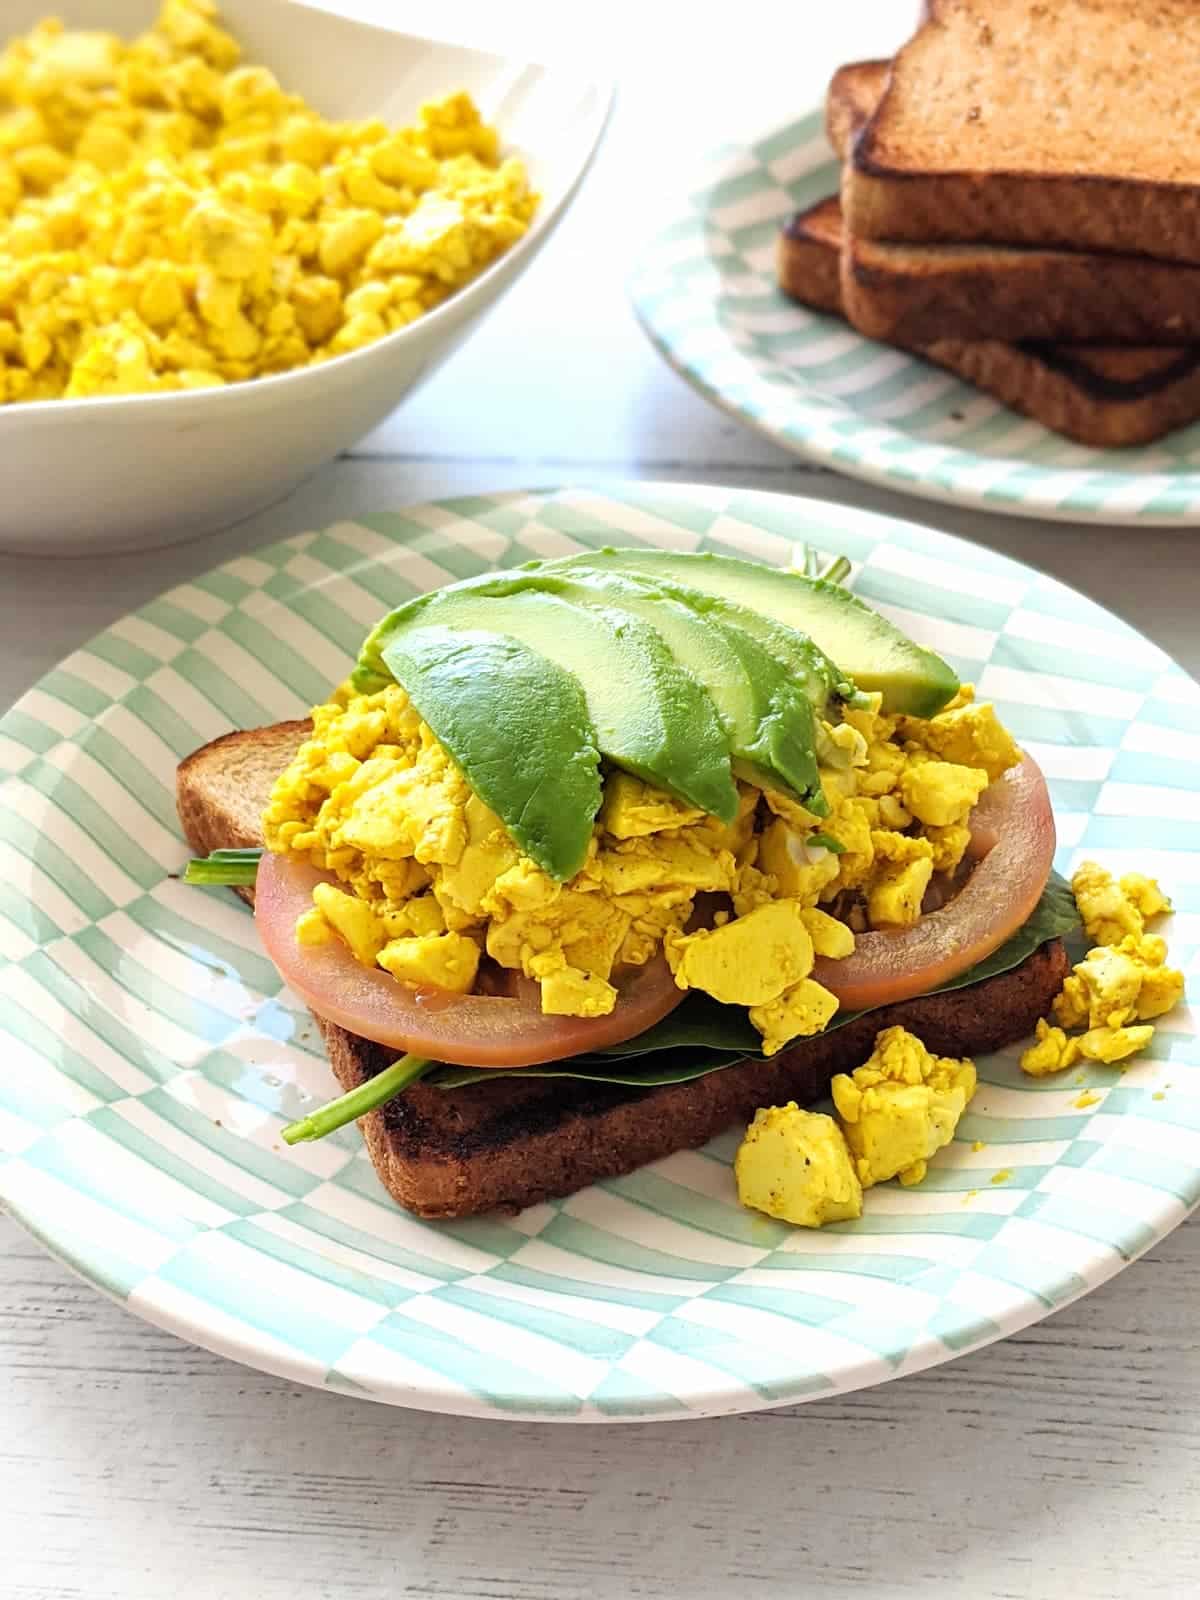 Silken tofu scramble served on toast with spinach, tomatoes, and sliced avocado.